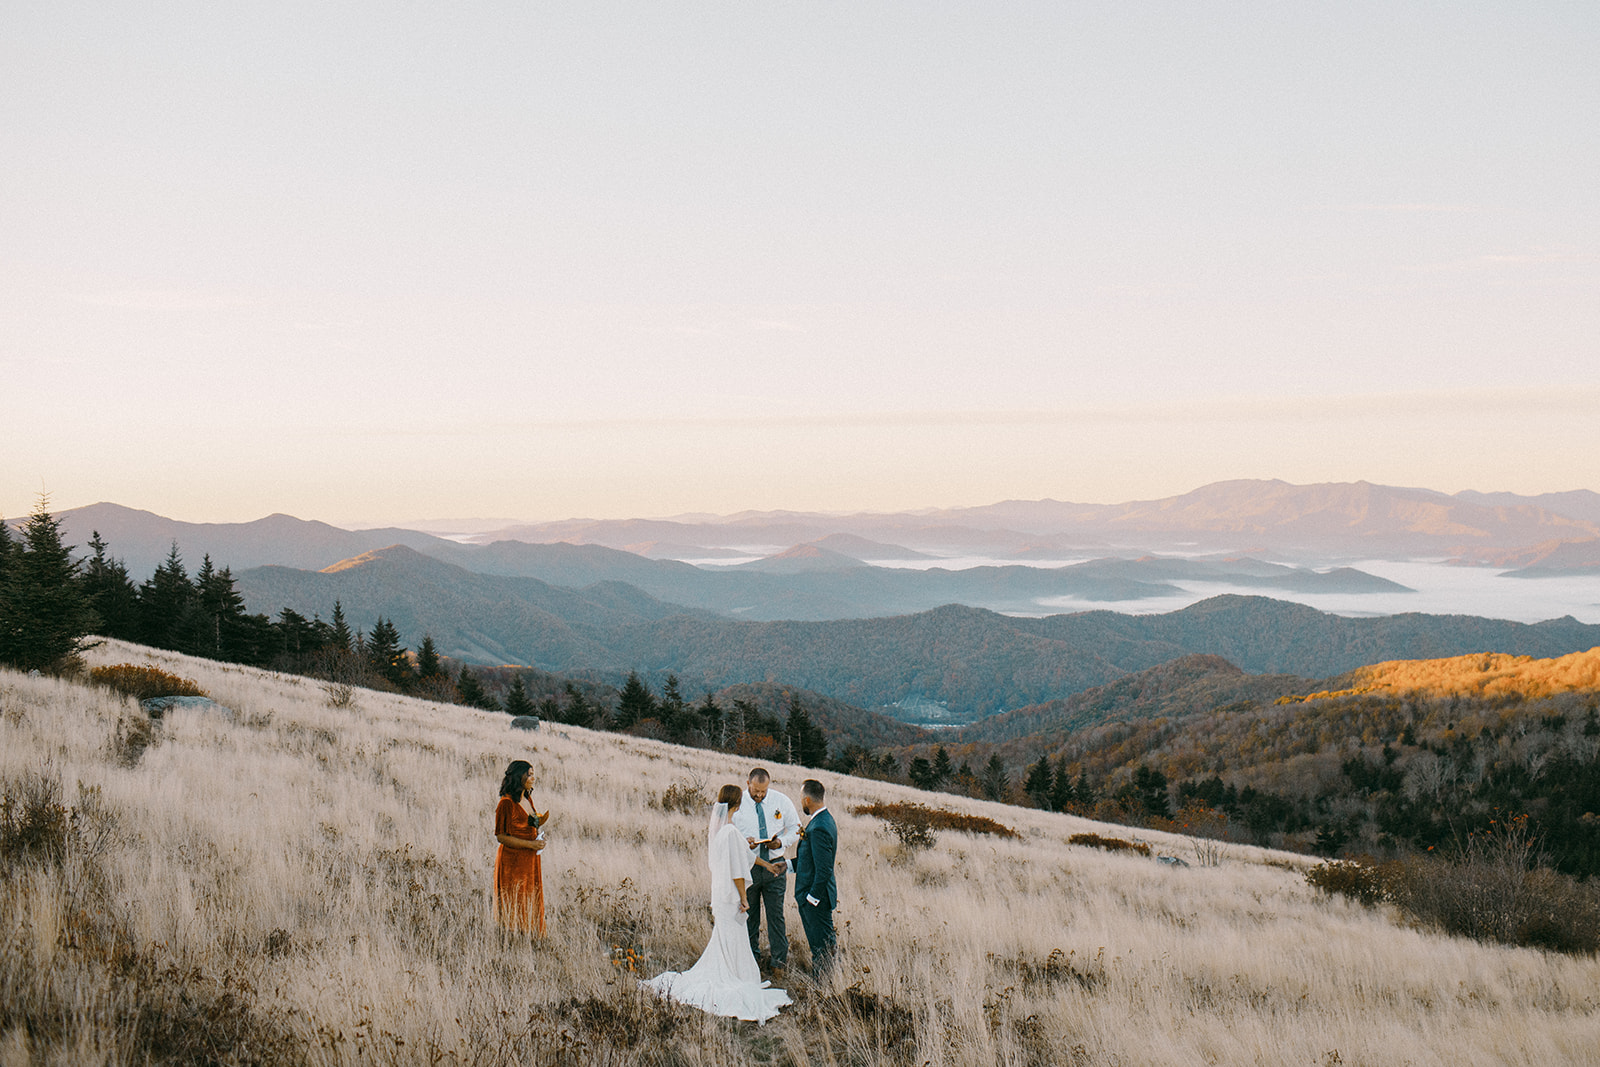 Couple eloping with private ceremony along the Appalachian Trail in Autumn